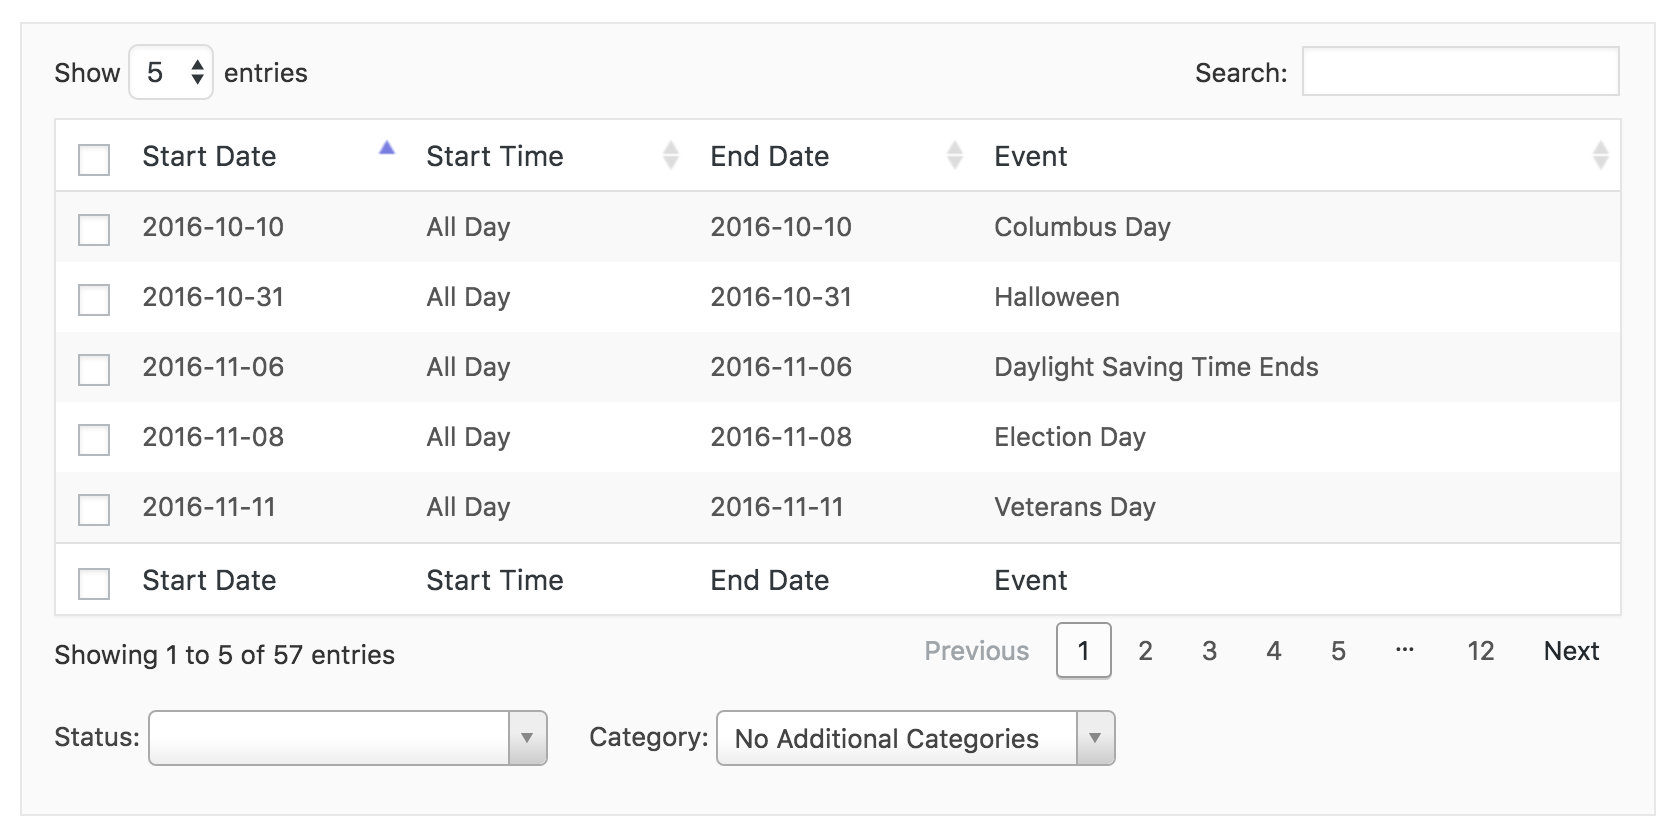 Preview Google Calendar imports before importing